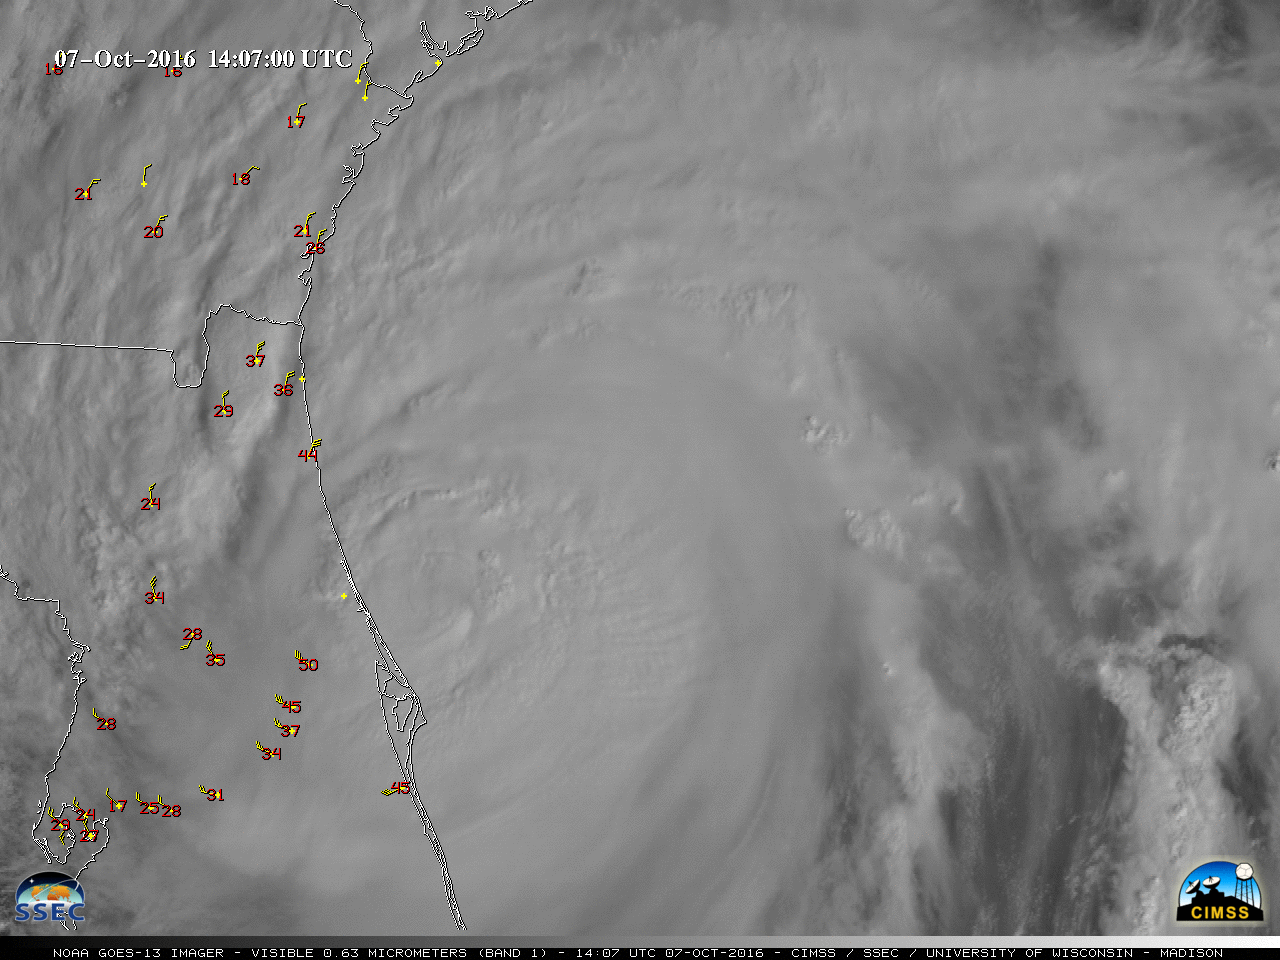 GOES-13 Visible (0.63 um) images, with hourly surface winds and gusts in knots [Click to play animation]